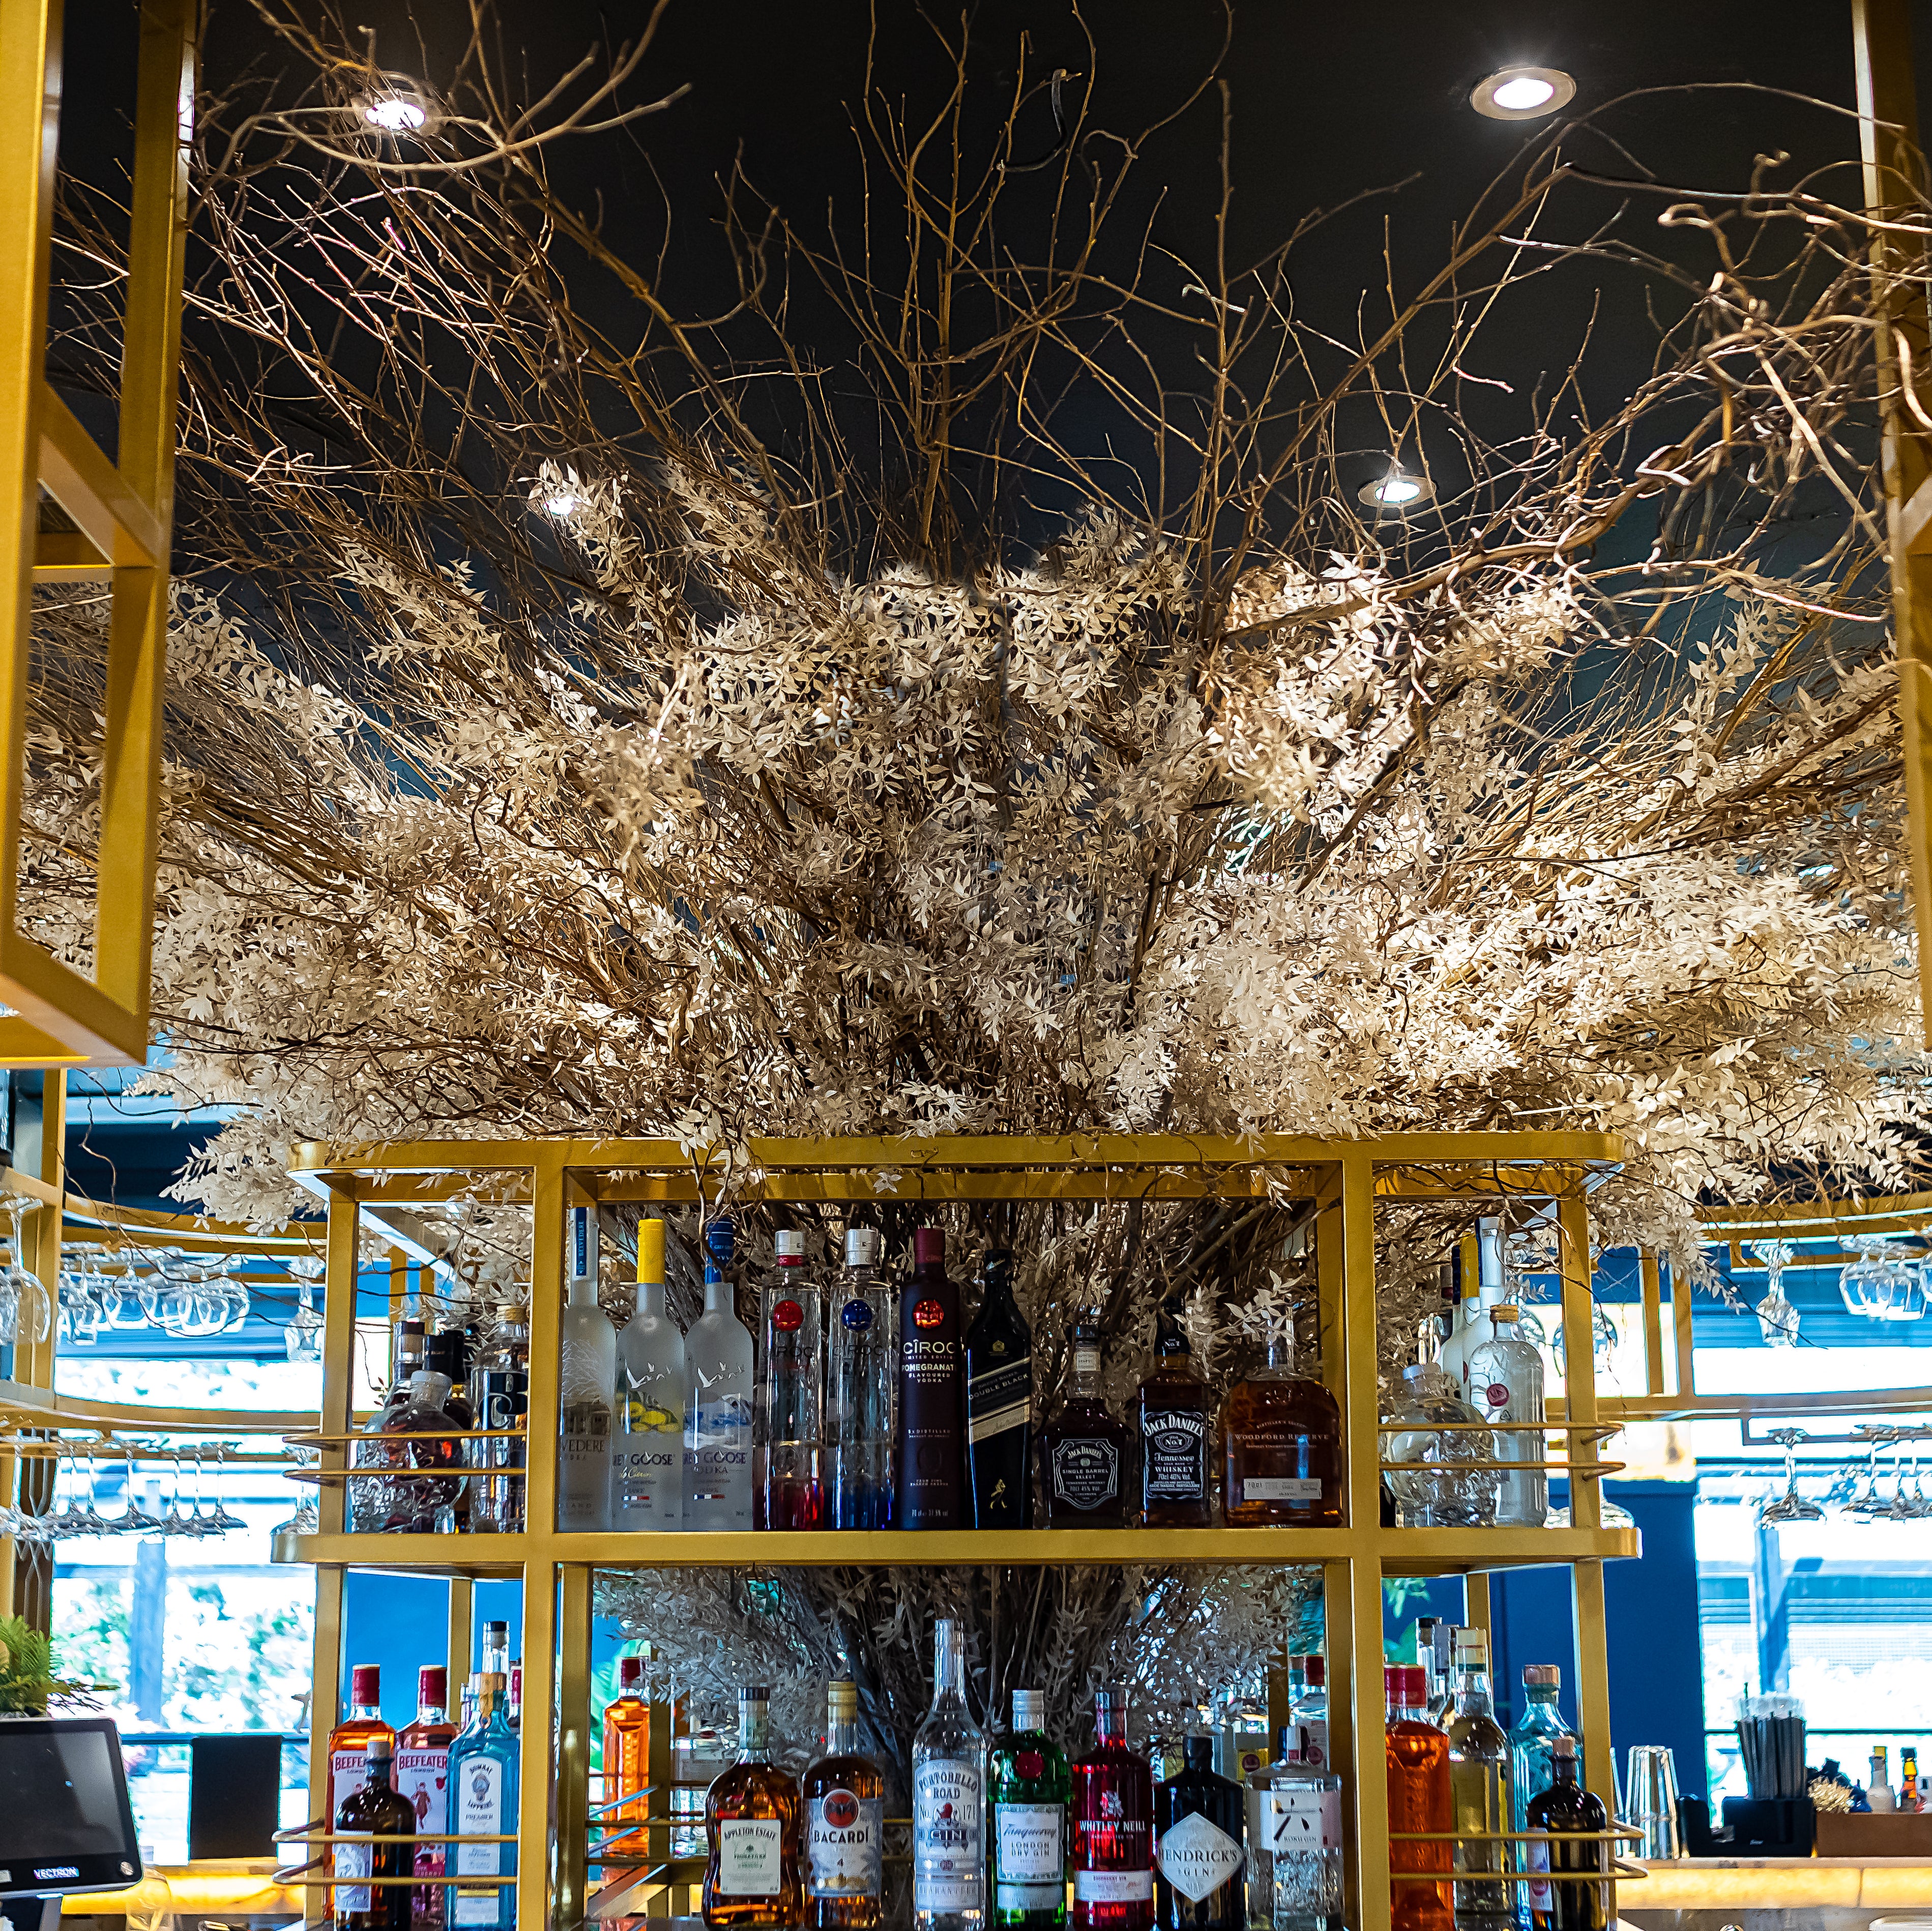 An intricate and expansive preserved floral tree installation by Amaranté London, featuring delicate branches and pale foliage, creates a dramatic centrepiece above the bar area of Nova London, a fashion wholesaler. The natural textures of the tree contrast with the neatly arranged bottles of spirits on the modern, yellow metal shelves below.